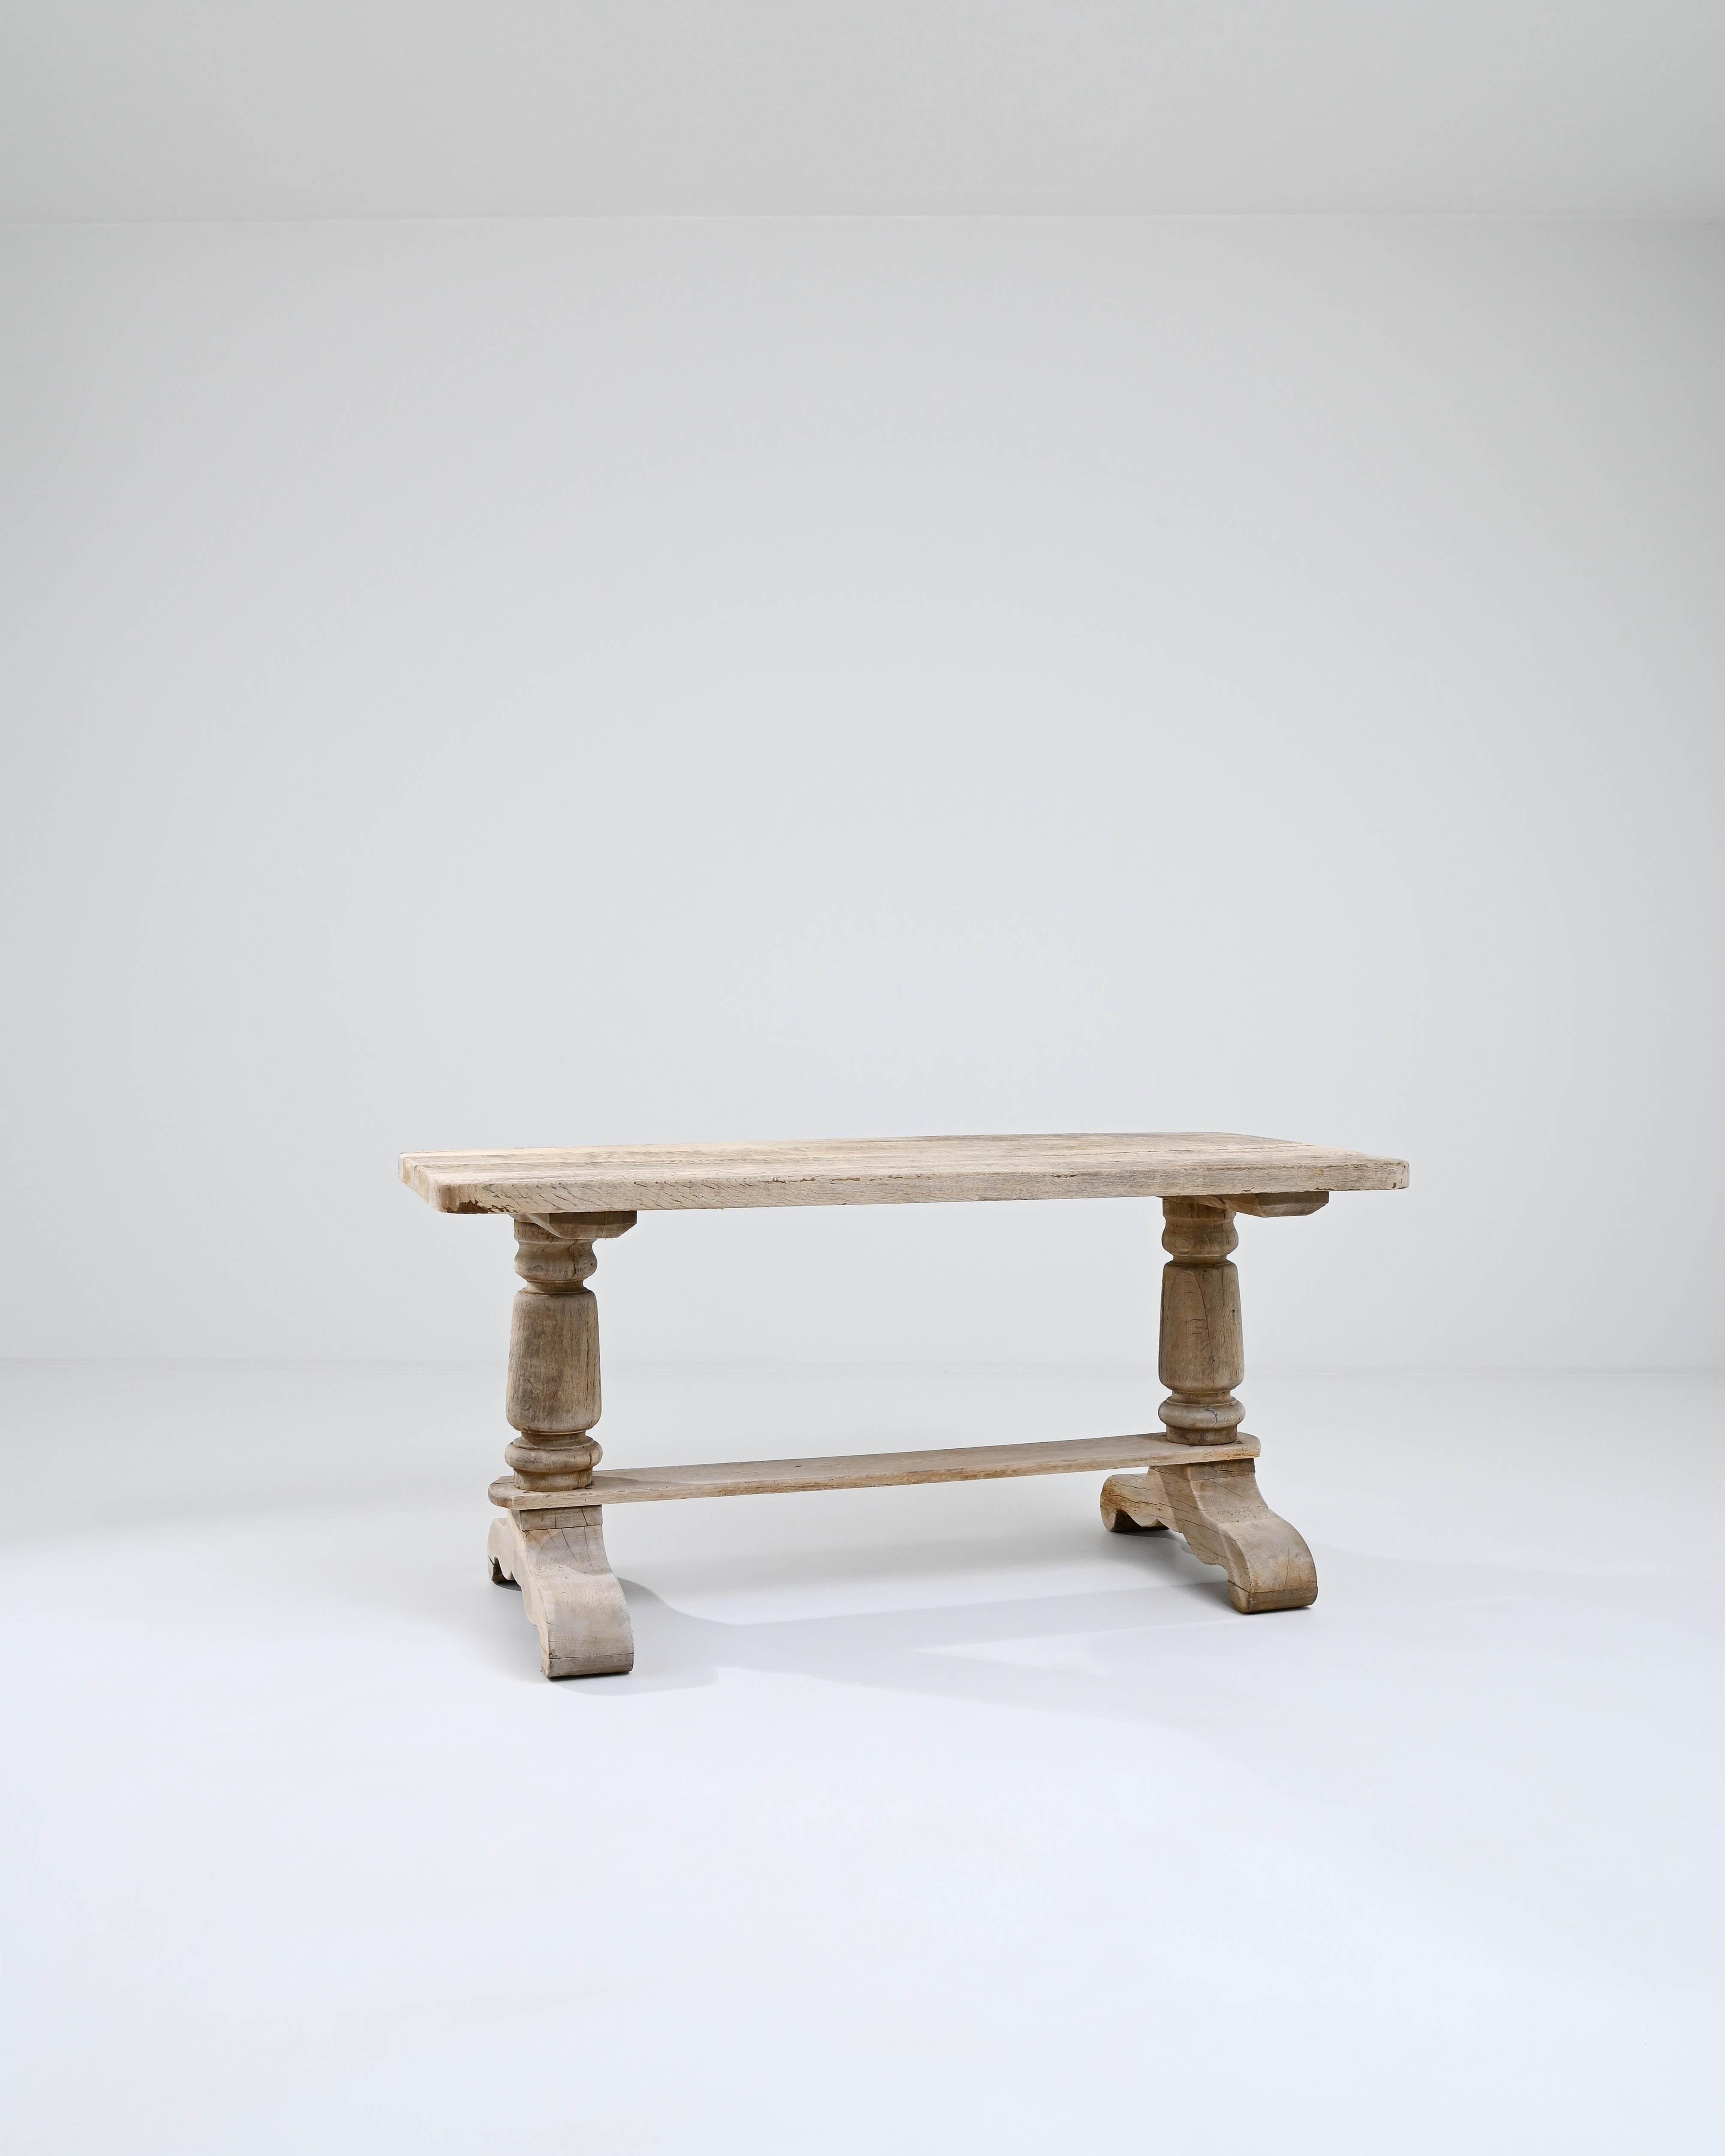 Both sturdy and graceful, this oak dining table cuts an eye-catching figure. Made in Belgium in the 20th century, the form reflects the traditional Provincial styles of the Flemish countryside. A simple rectangular table top rests atop a trestle